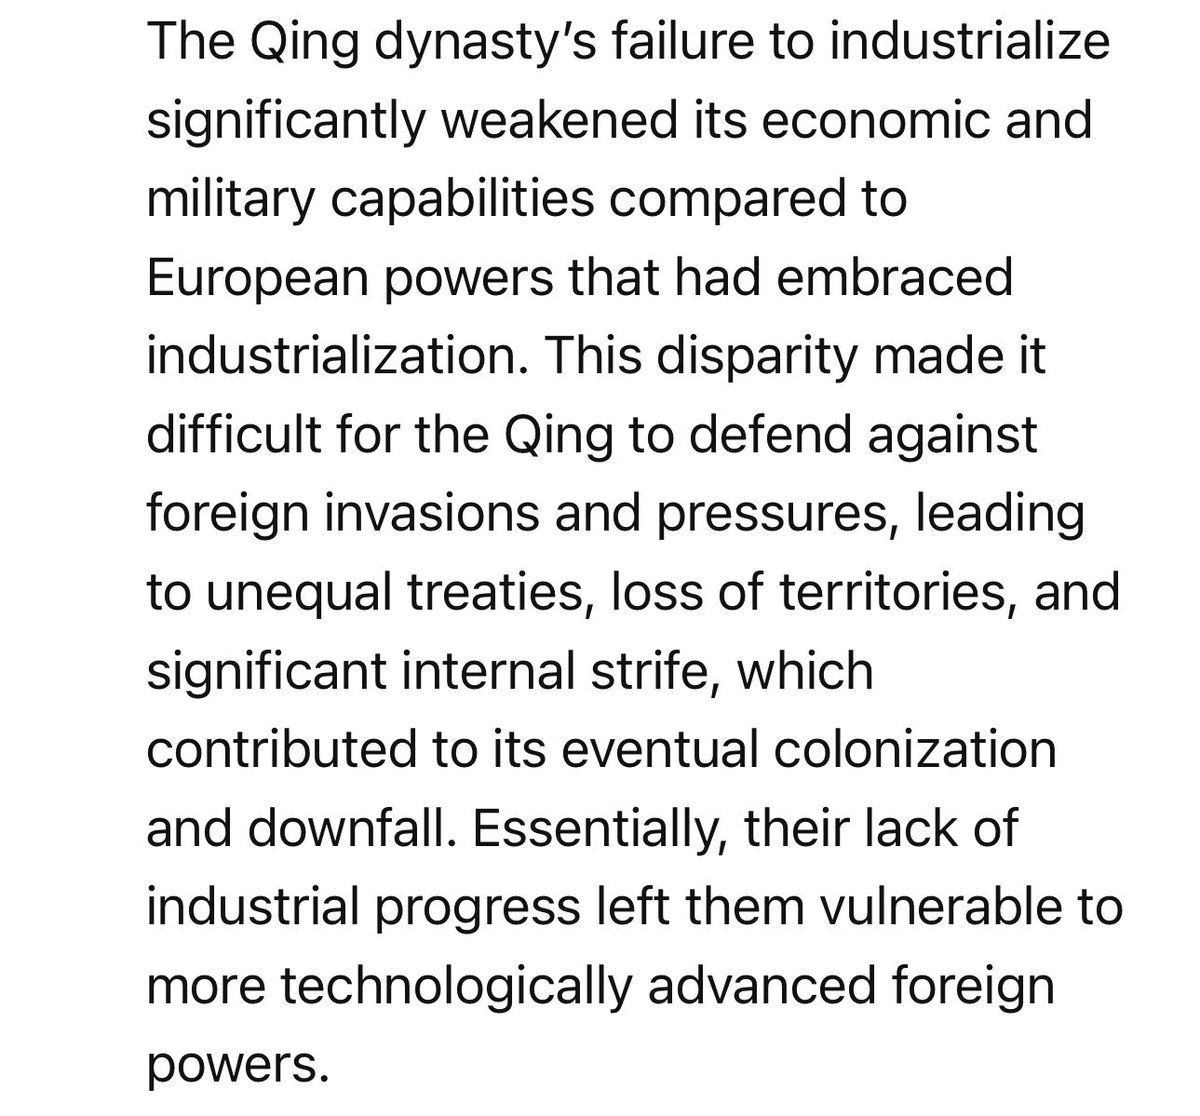 You can't ignore it Historically countries and regions that end up technologically behind get conquered by enemies See the effects of NOT industrializing during Qing dynasty while Europe did, they ended up conquered by European powers for almost 100 years (1840s-1940s roughly),…